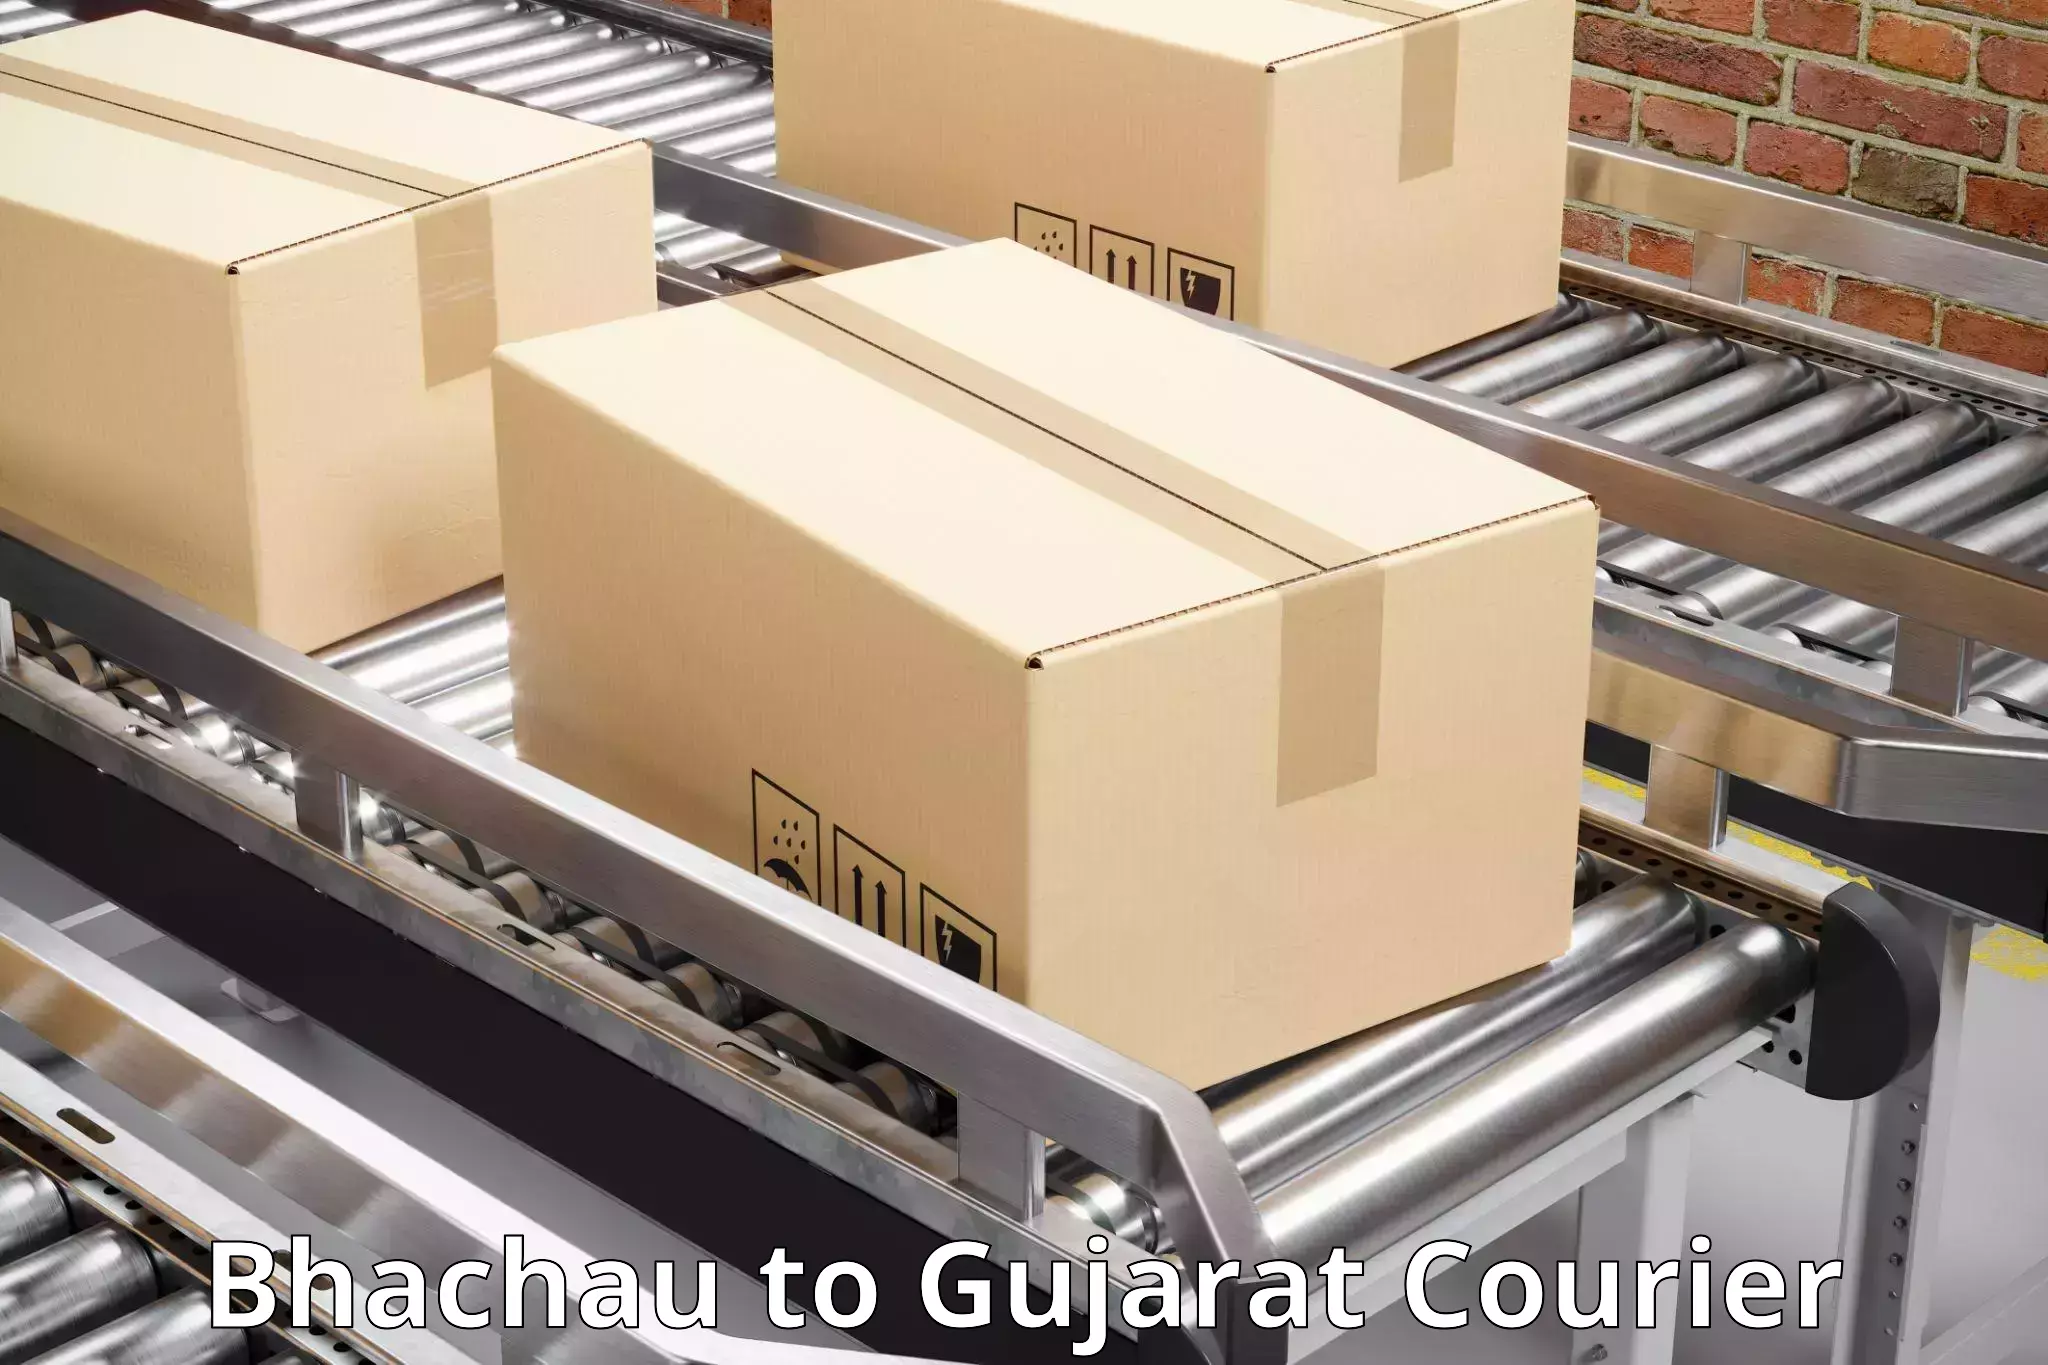 Modern courier technology Bhachau to Ahmedabad